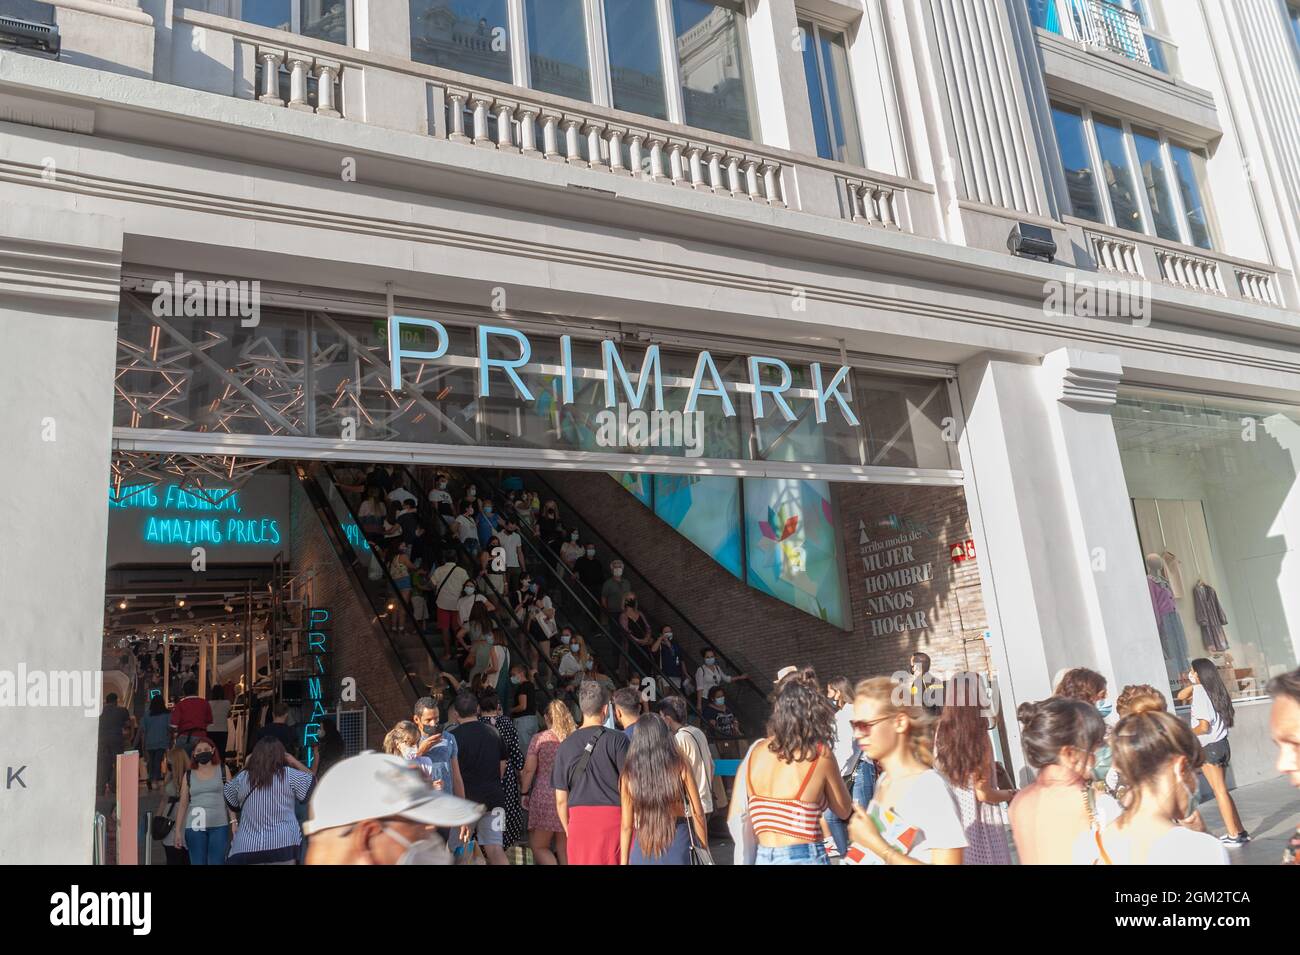 Take a Peek Inside Primark's 3-Level Store in Chicago – Visual